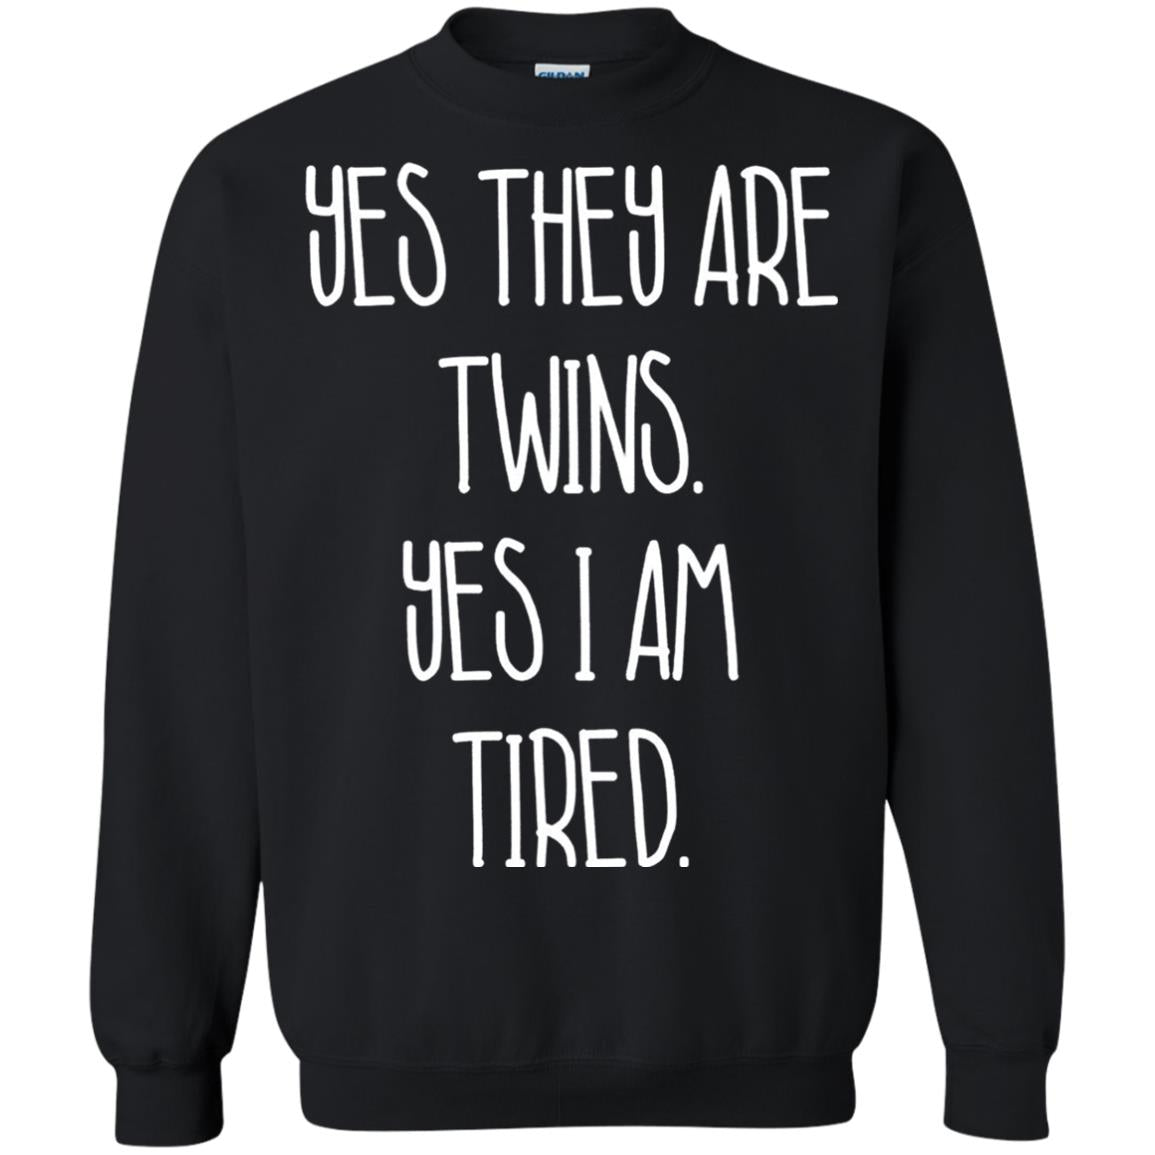 Yes They Are Twins Yes I Am Tired Twins Family Shirt